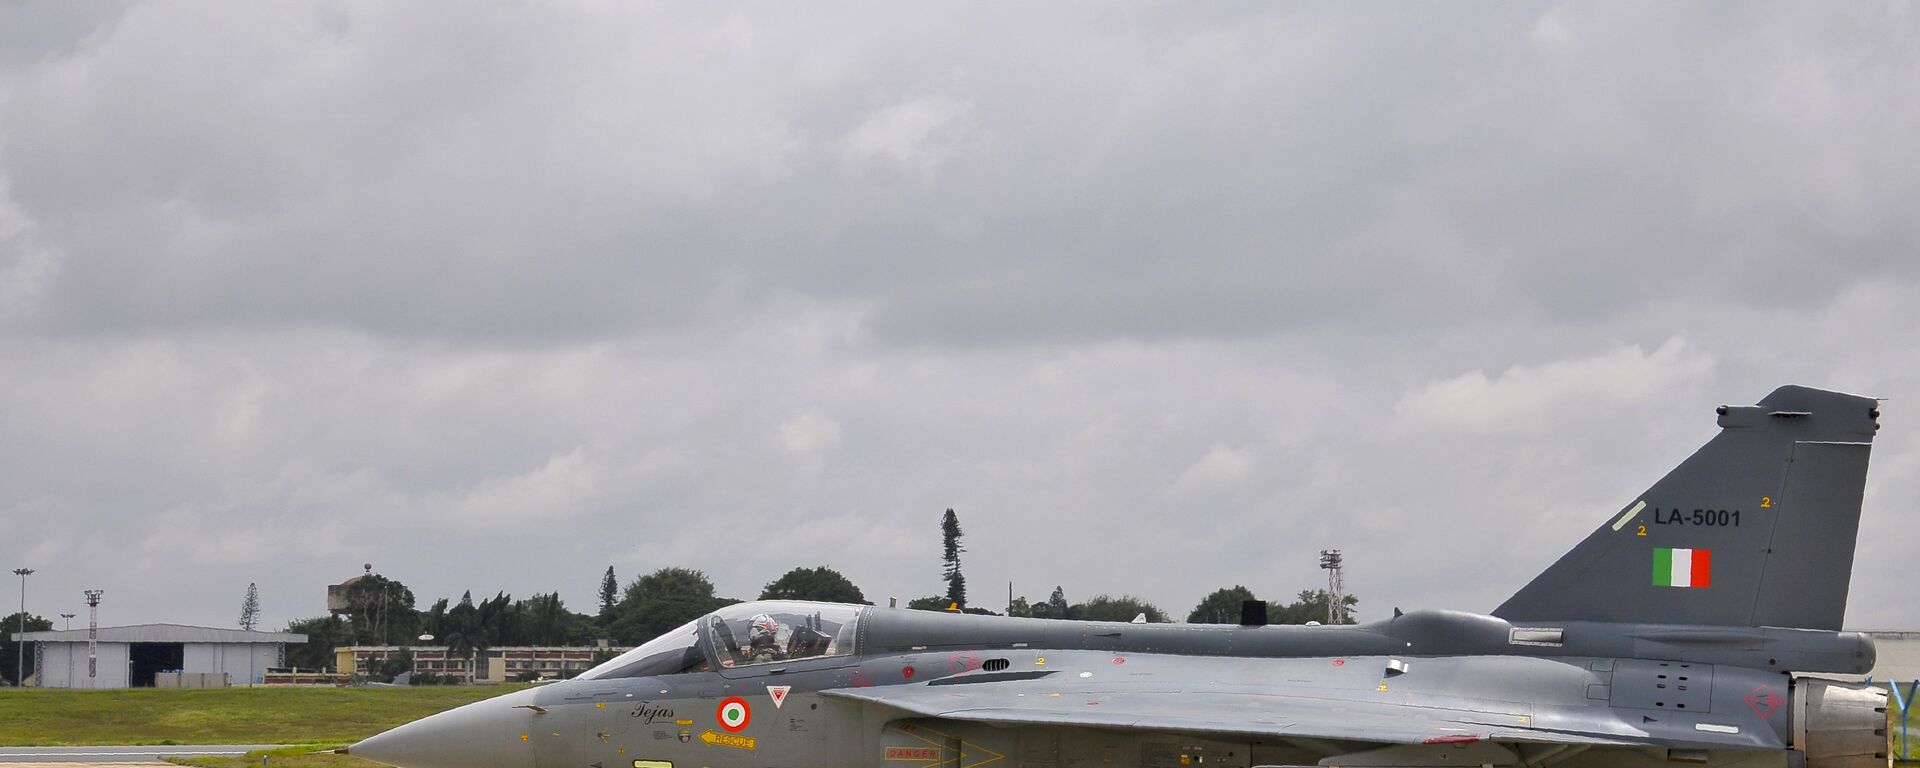 An Indian Air Force (IAF) pilot taxies a newly commissioned Tejas or Light Combat Aircraft (LCA) on a runway in Bangalore during a ceremony in the southern Indian city. (File) - Sputnik International, 1920, 18.11.2016